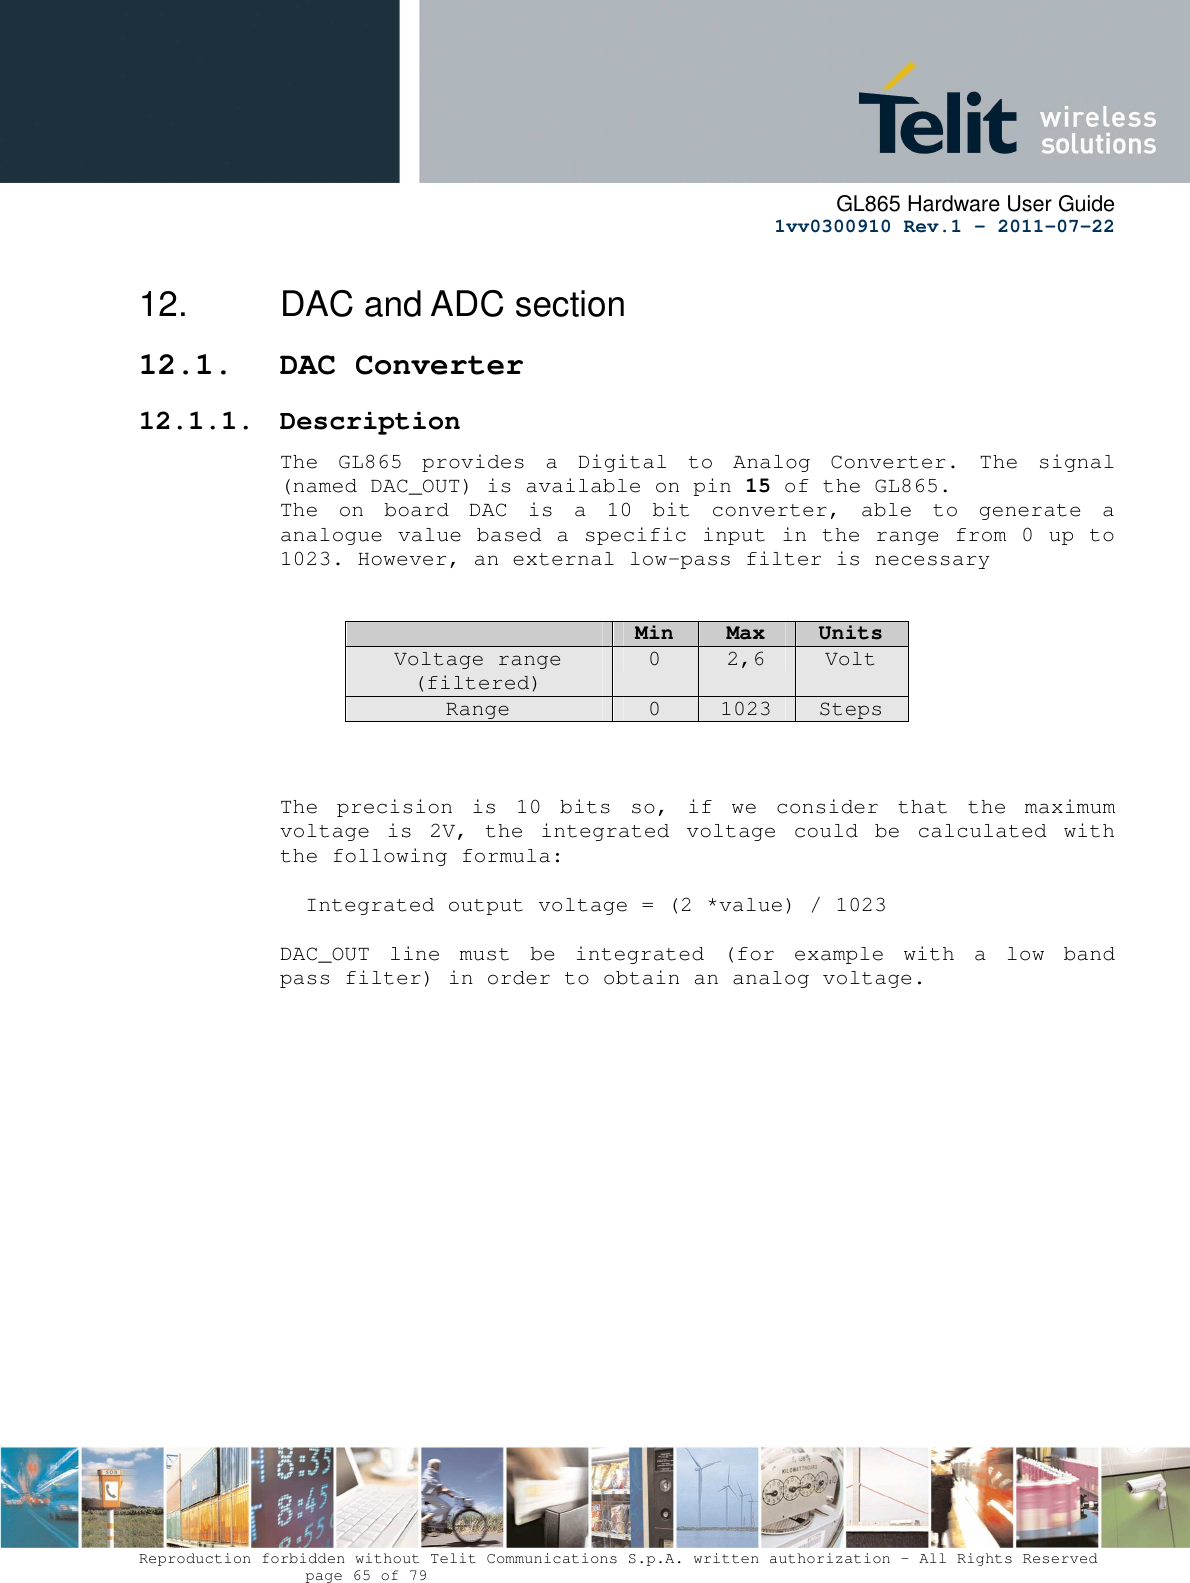      GL865 Hardware User Guide     1vv0300910 Rev.1 – 2011-07-22       Reproduction forbidden without Telit Communications S.p.A. written authorization - All Rights Reserved    page 65 of 79  12.  DAC and ADC section 12.1. DAC Converter 12.1.1. Description The  GL865  provides  a  Digital  to  Analog  Converter.  The  signal (named DAC_OUT) is available on pin 15 of the GL865. The  on  board  DAC  is  a  10  bit  converter,  able  to  generate  a analogue value based a specific input in the range from 0 up to 1023. However, an external low-pass filter is necessary    Min  Max  Units Voltage range (filtered) 0  2,6  Volt Range  0  1023  Steps    The  precision  is  10  bits  so,  if  we  consider  that  the  maximum voltage  is  2V,  the  integrated  voltage  could  be  calculated  with the following formula:   Integrated output voltage = (2 *value) / 1023  DAC_OUT  line  must  be  integrated  (for  example  with  a  low  band pass filter) in order to obtain an analog voltage. 